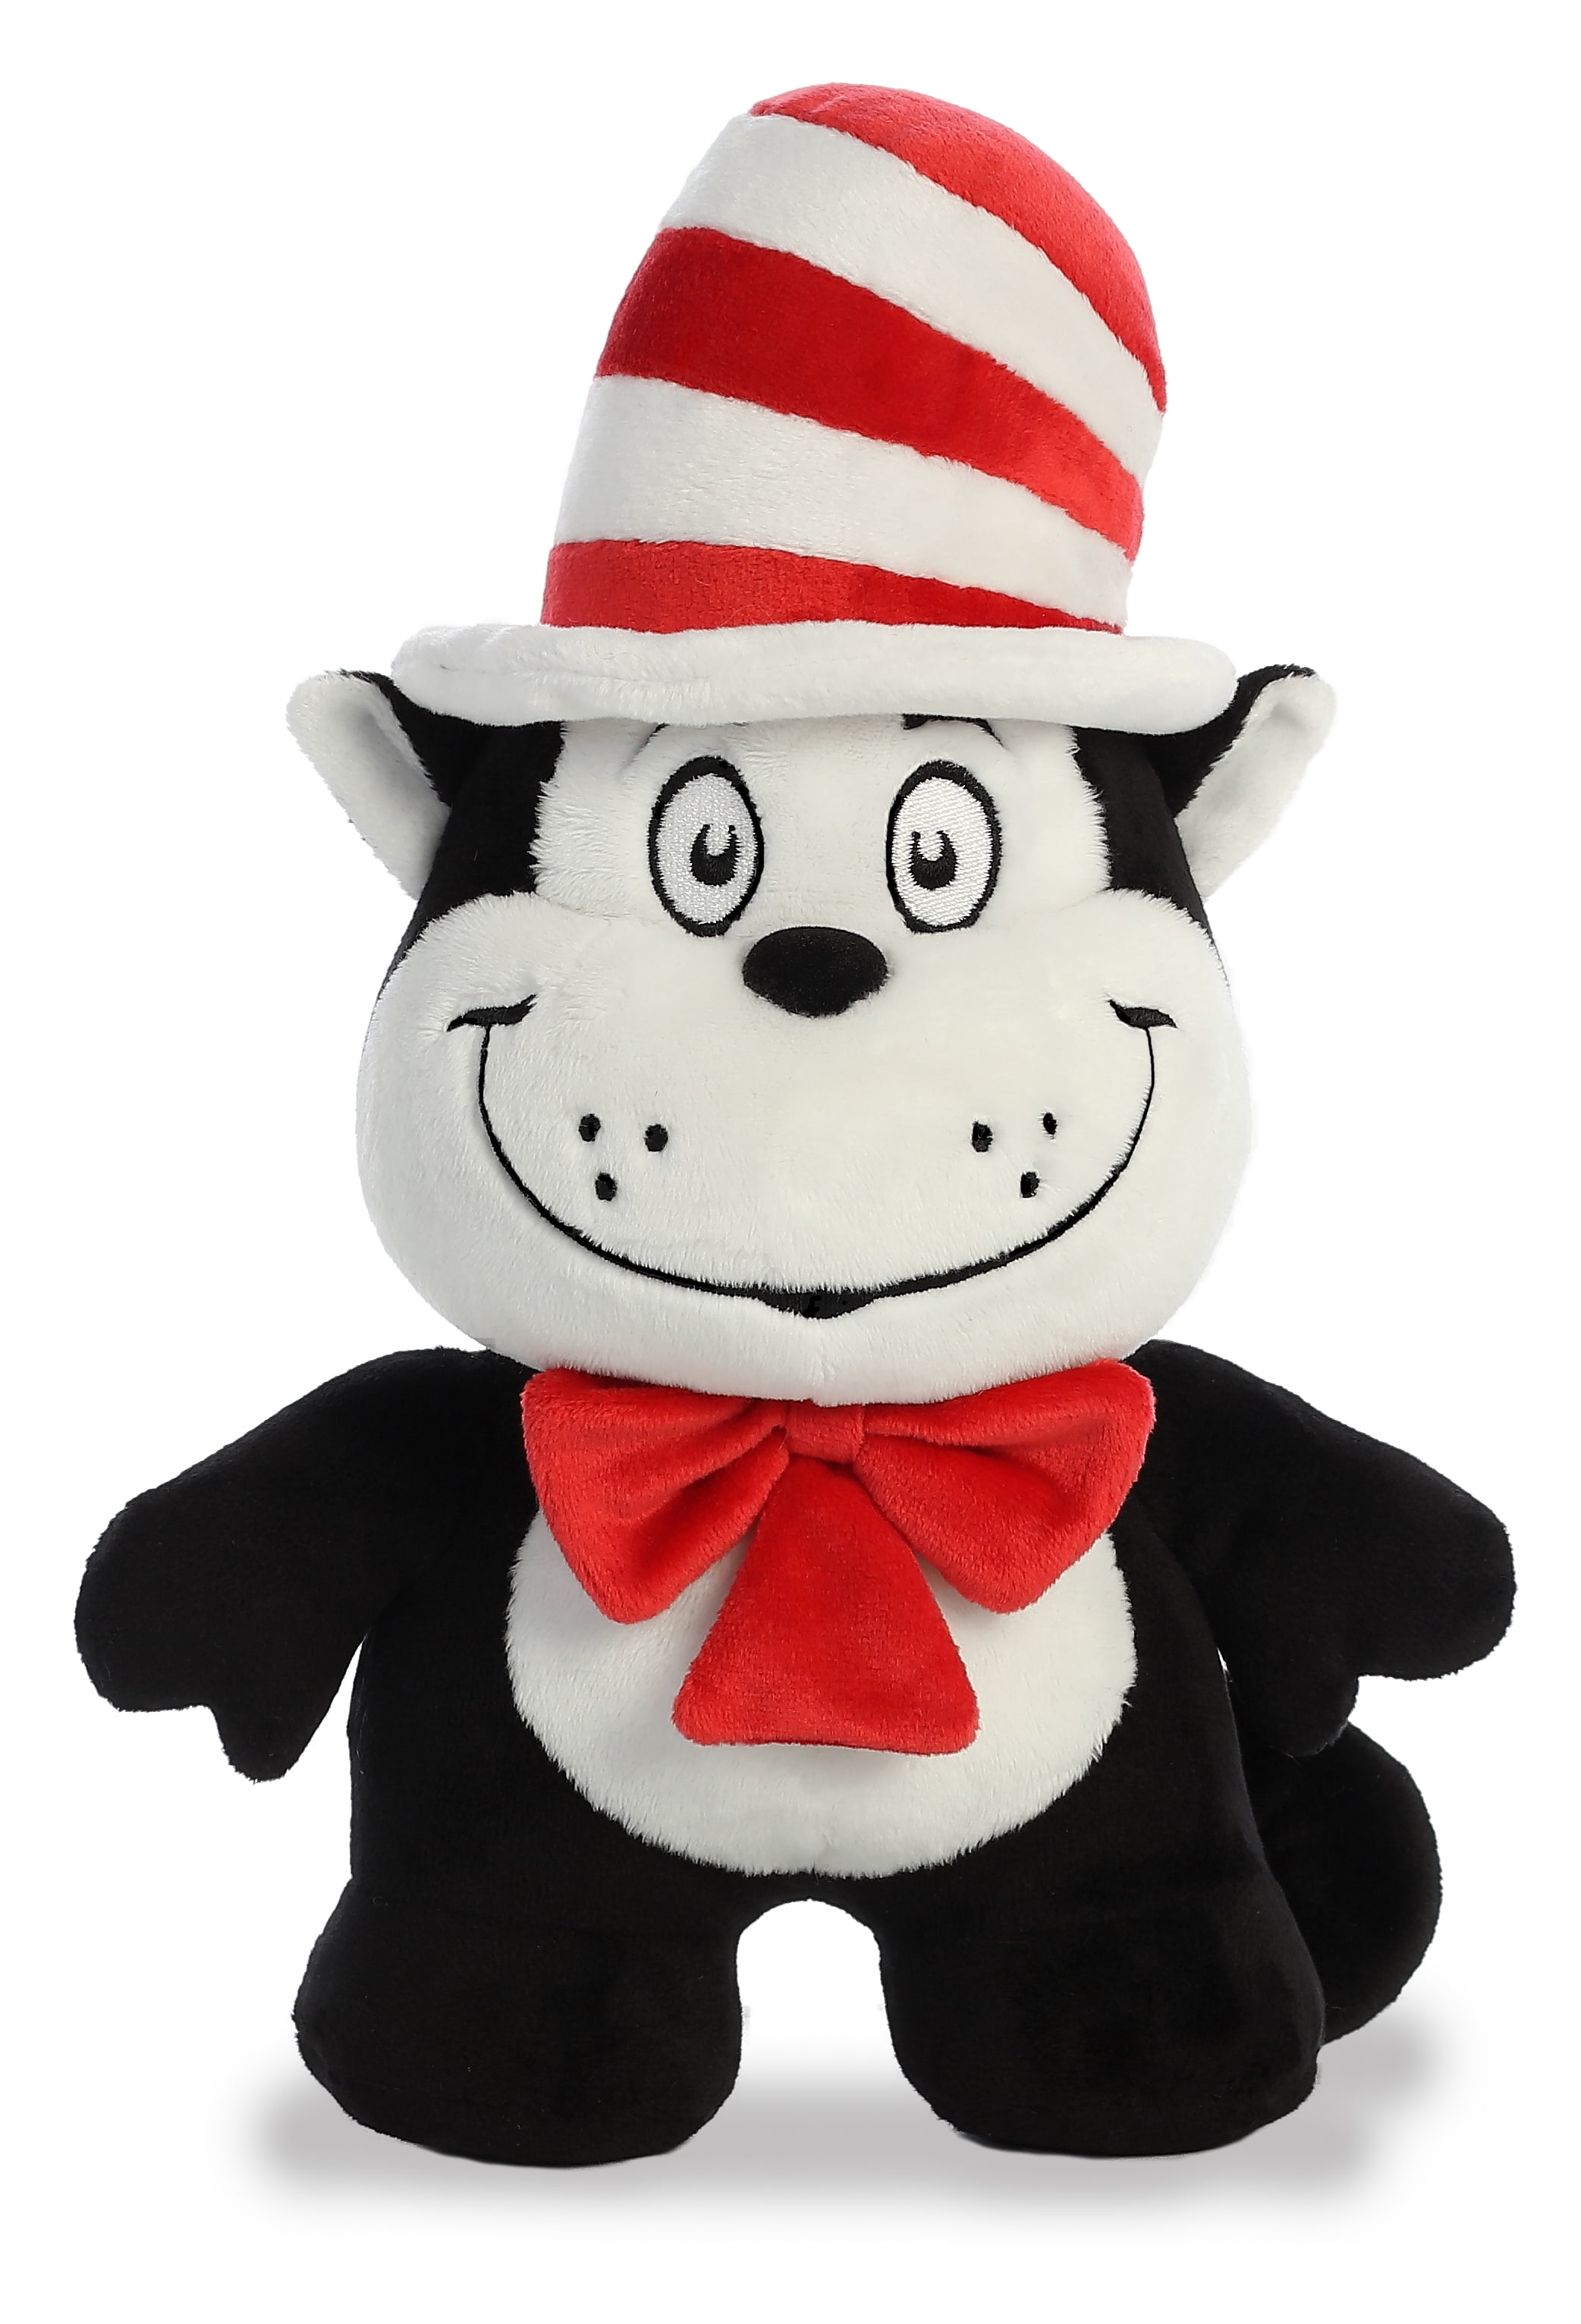 20 inch Plush Toy Stuffed Plush Collectible Animal Cat In The Hat 